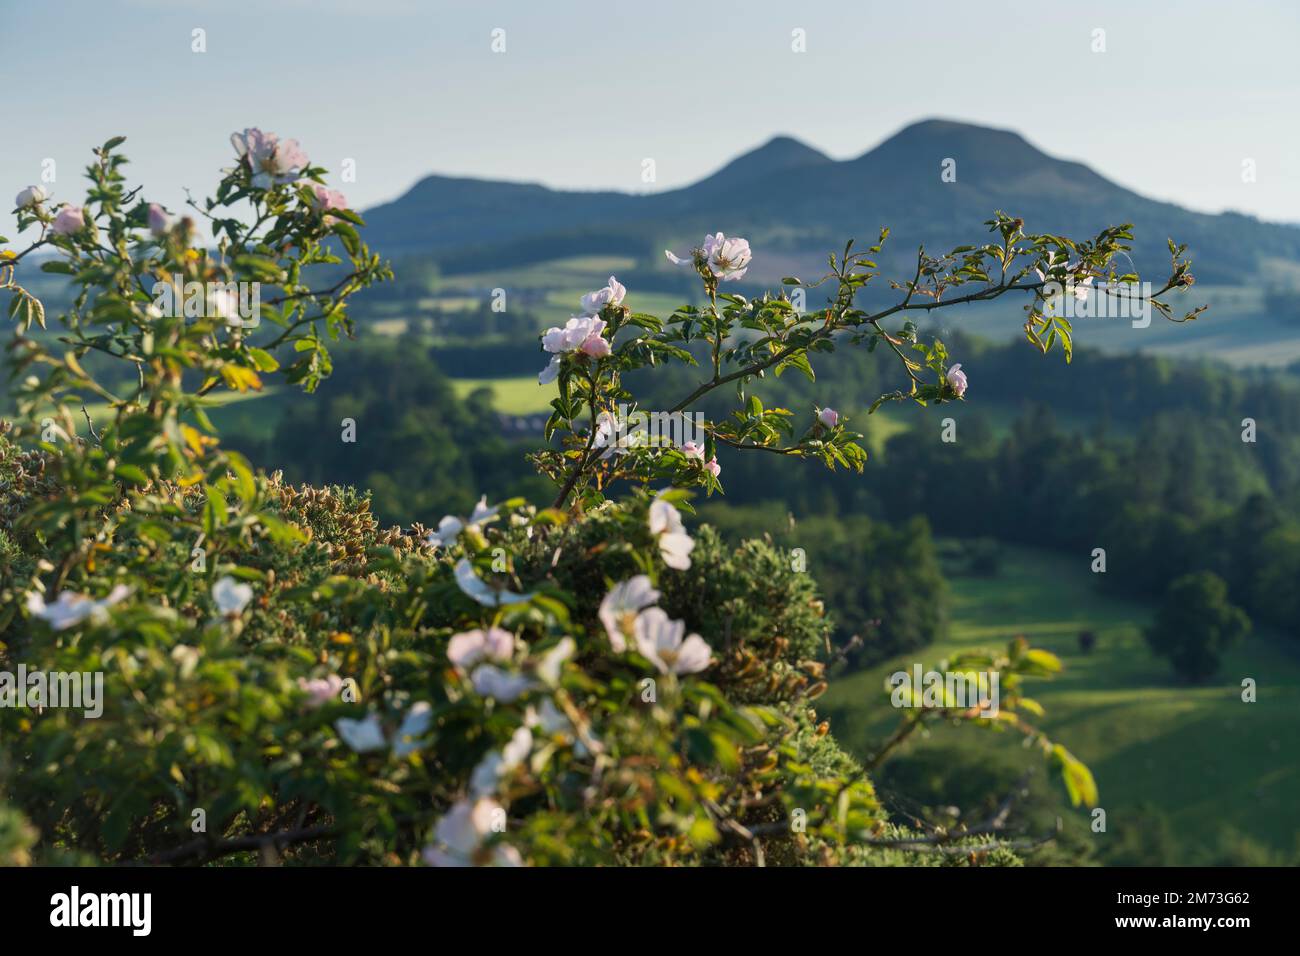 The wild rose of Scotland, or eglantine, in the foreground of Scott's View of the Eildon Hills near Melrose, Scottish Borders, in June Stock Photo